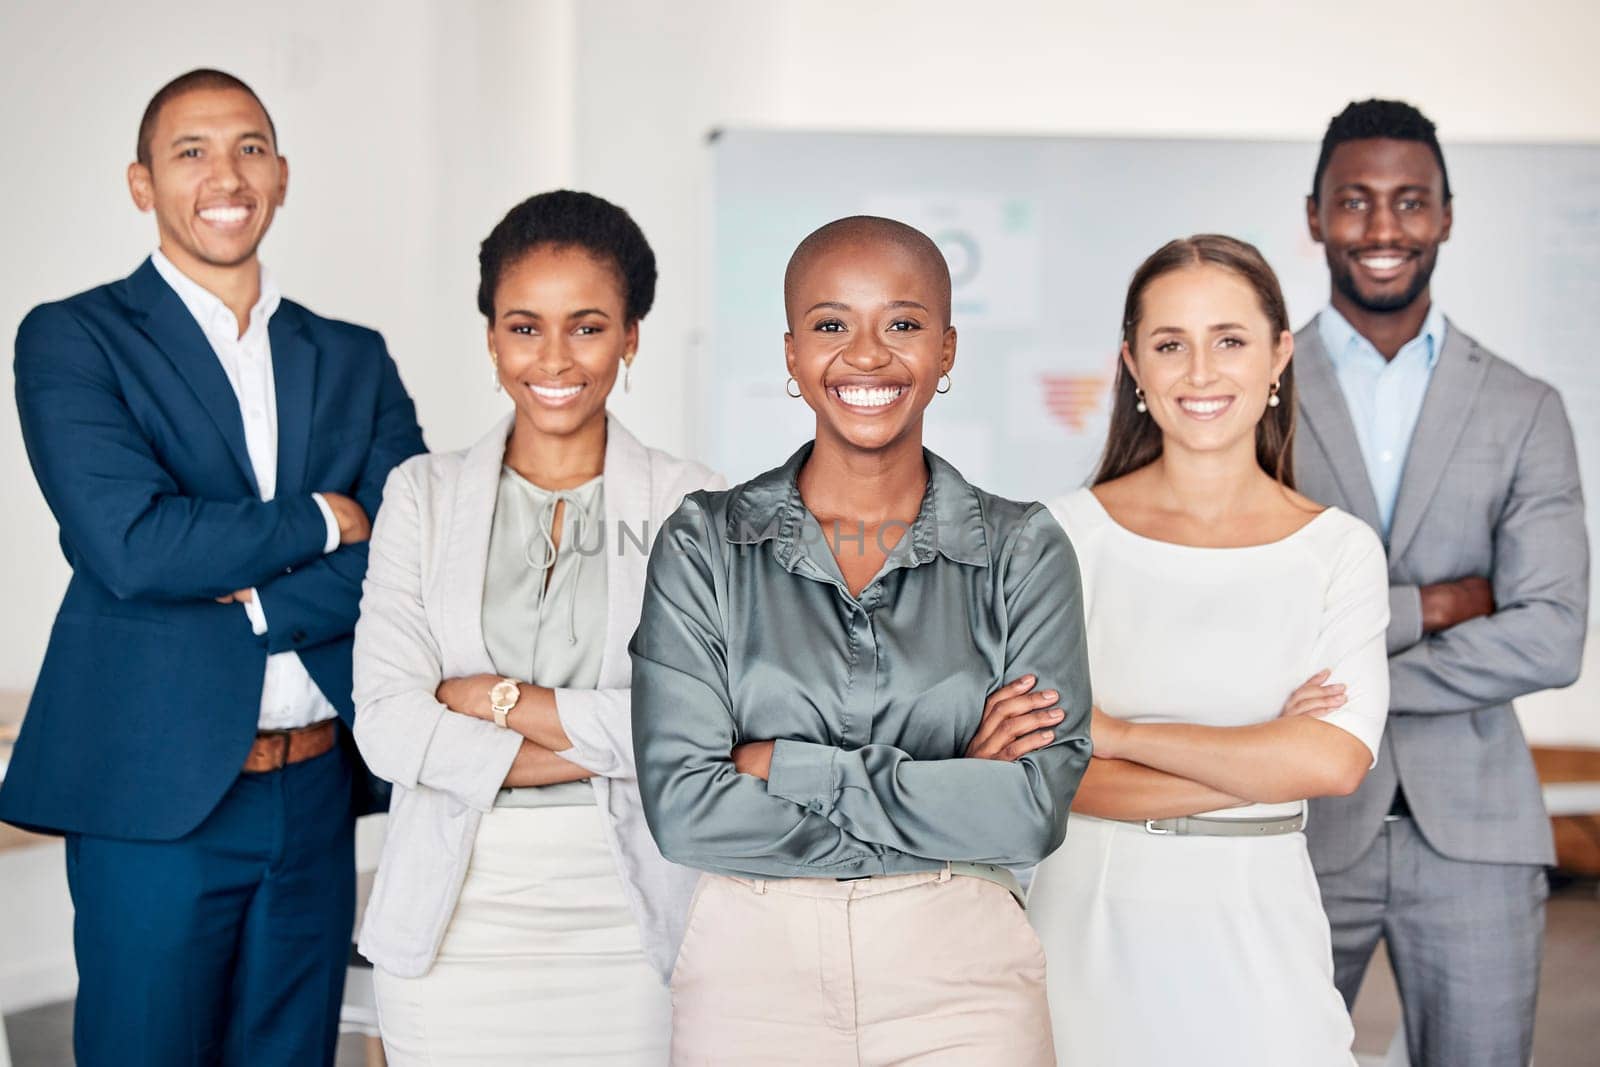 Business team portrait, people smile in professional office and global company diversity in Toronto boardroom. Black woman in leadership career, happy corporate staff together.and group success by YuriArcurs